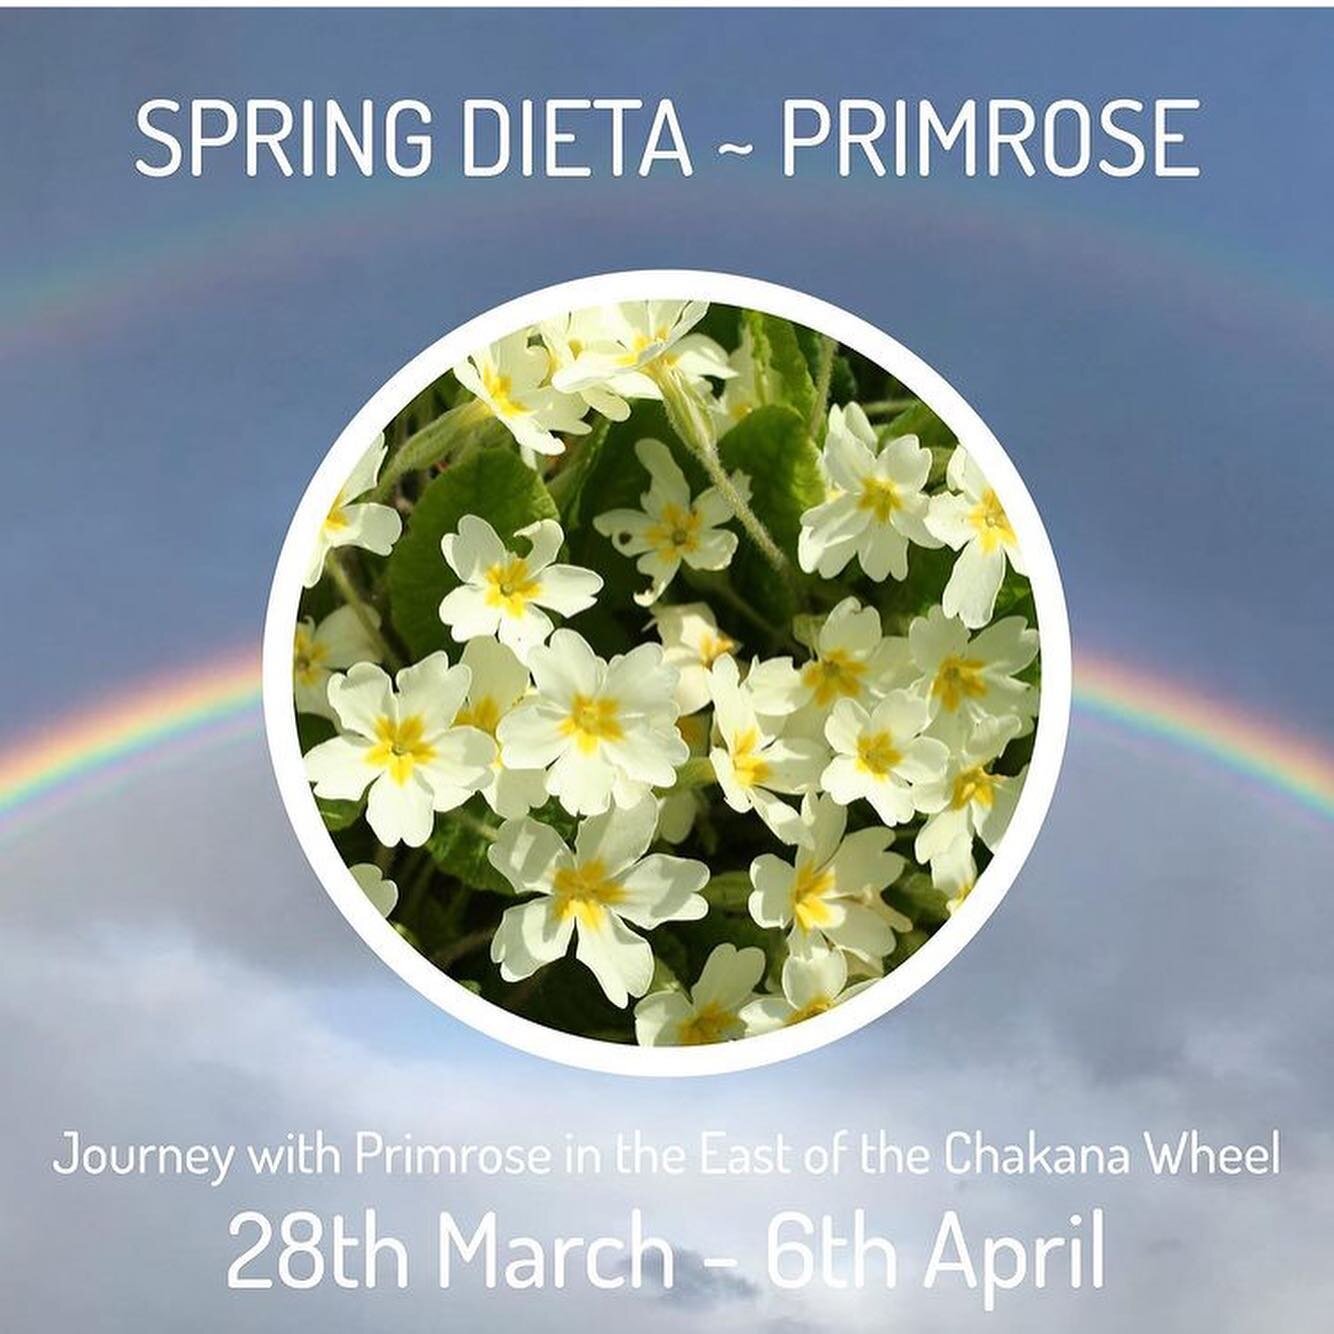 Anybody else feeling the call to be guided through a Plant Dieta with @therainbowportal ? 🥰 This will be my first plant dieta, with the last day of the course being the first day of my #sacredsecretion ; what a perfect pre-preservation cleanse for u